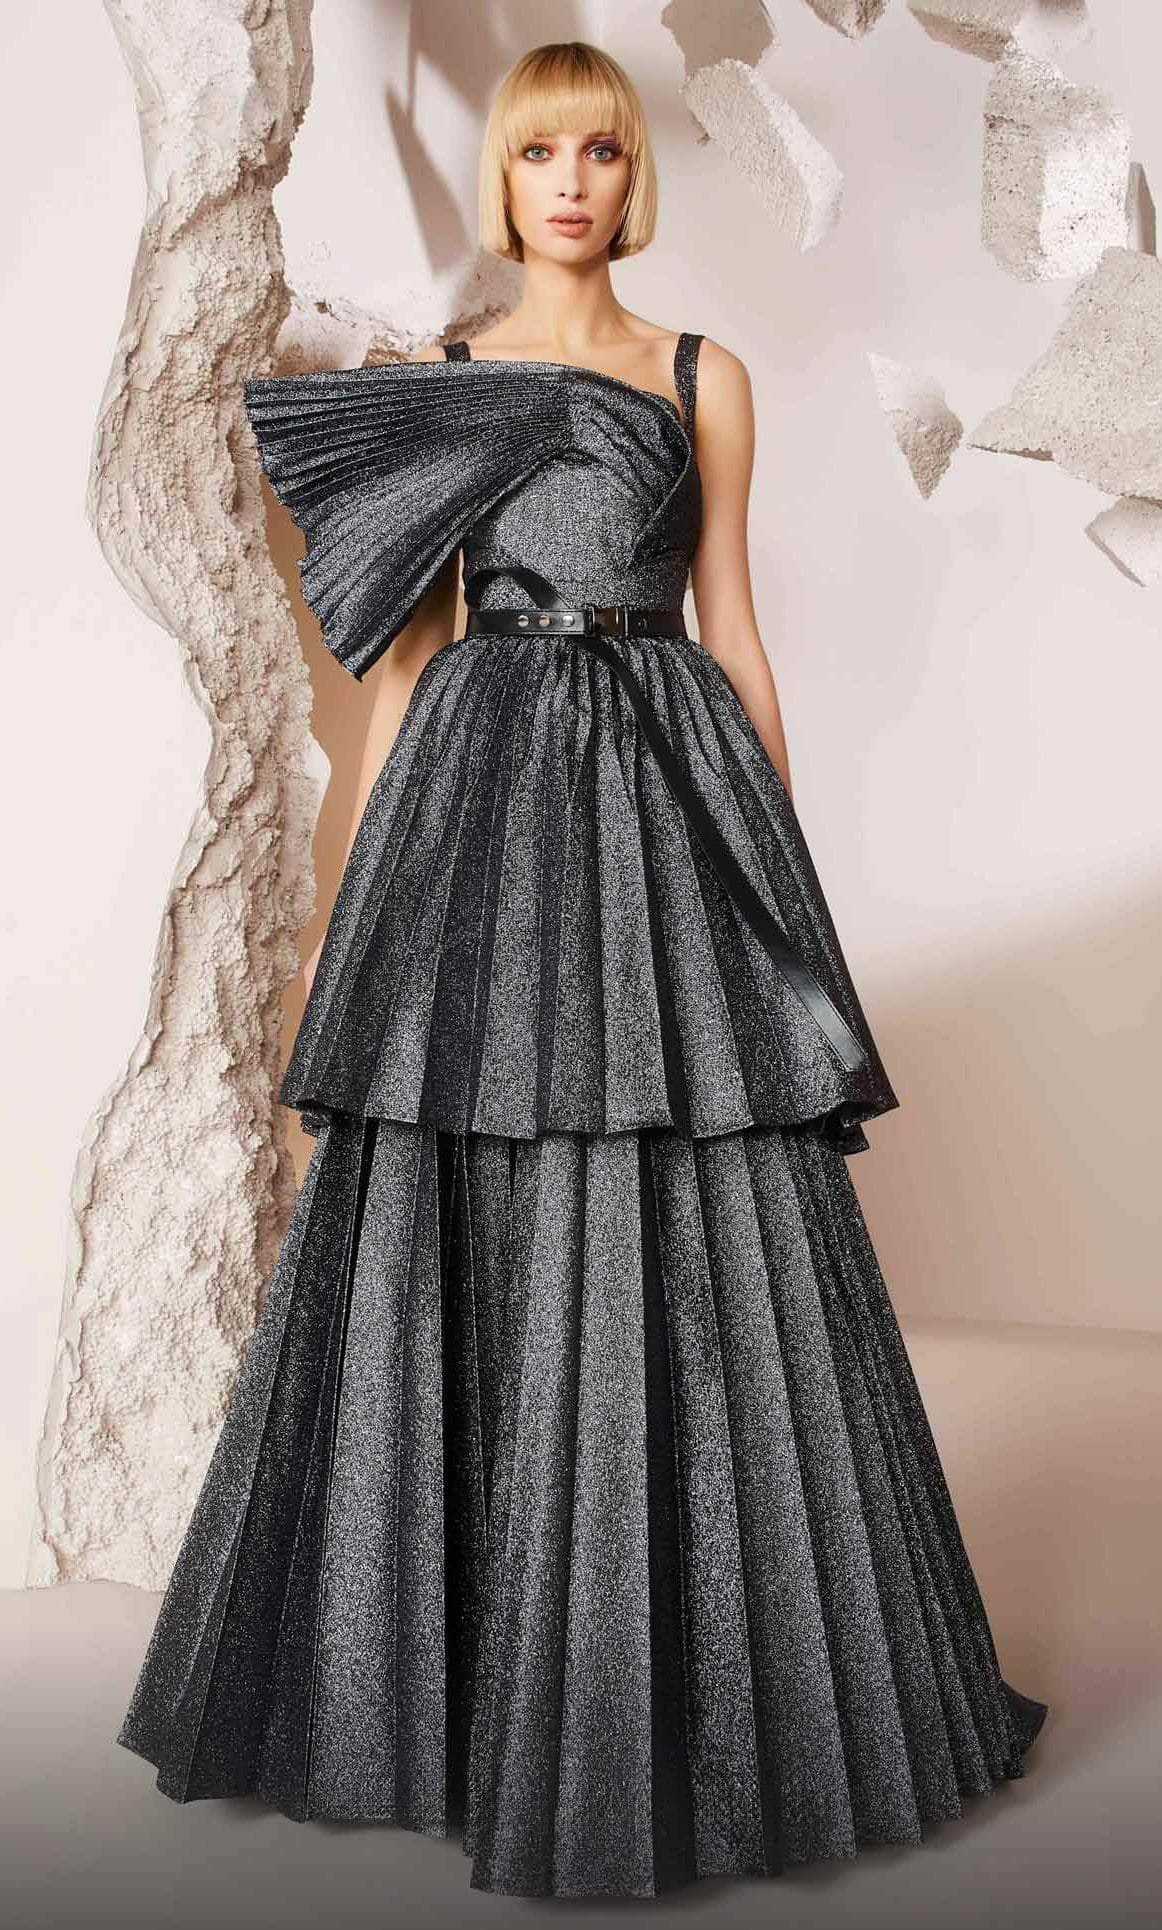 Image of MNM Couture E0017 - Asymmetric Metallic Pleated Evening Gown